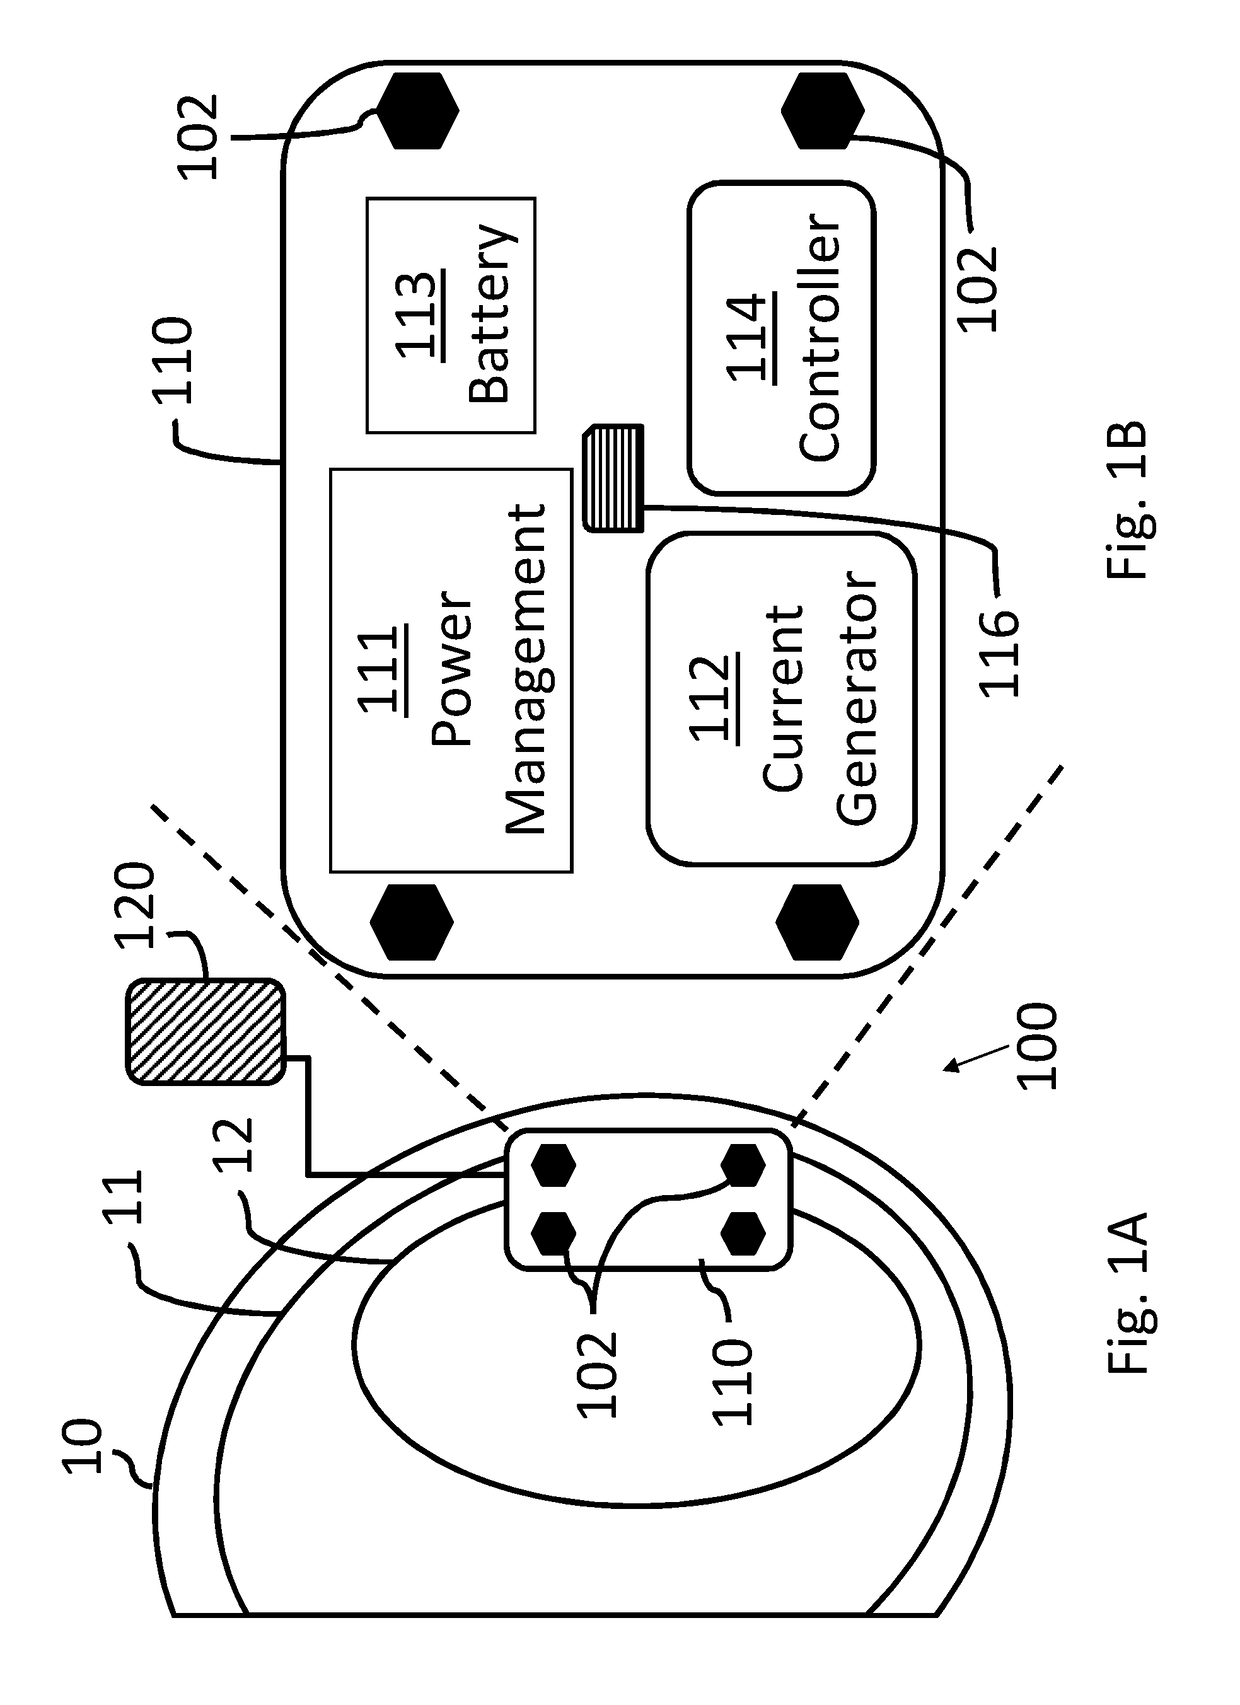 System and method for detecting contractions